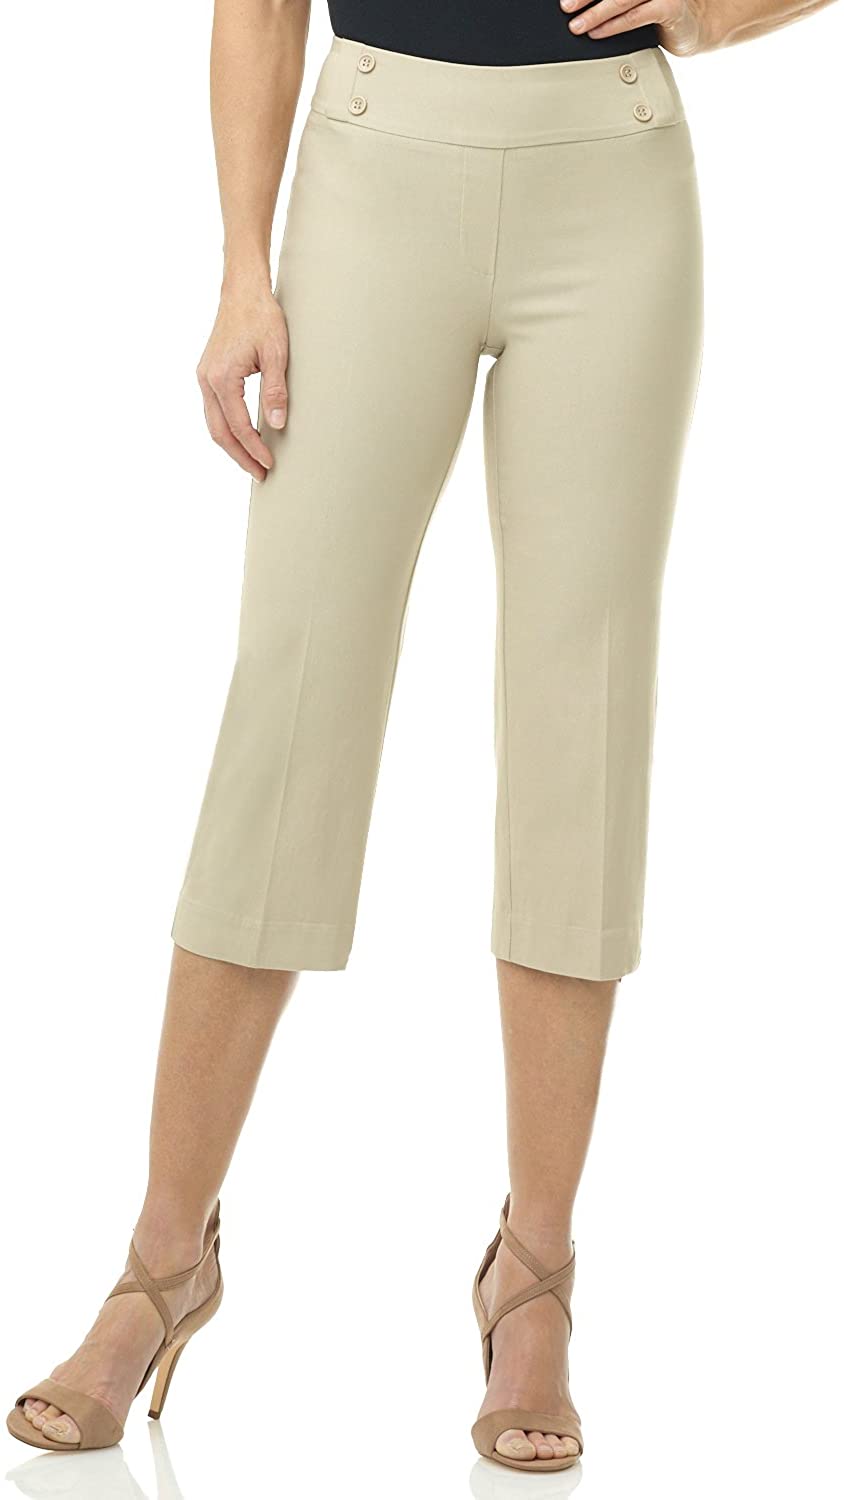 Rekucci Womens Ease into Comfort Capri with Button Detail 